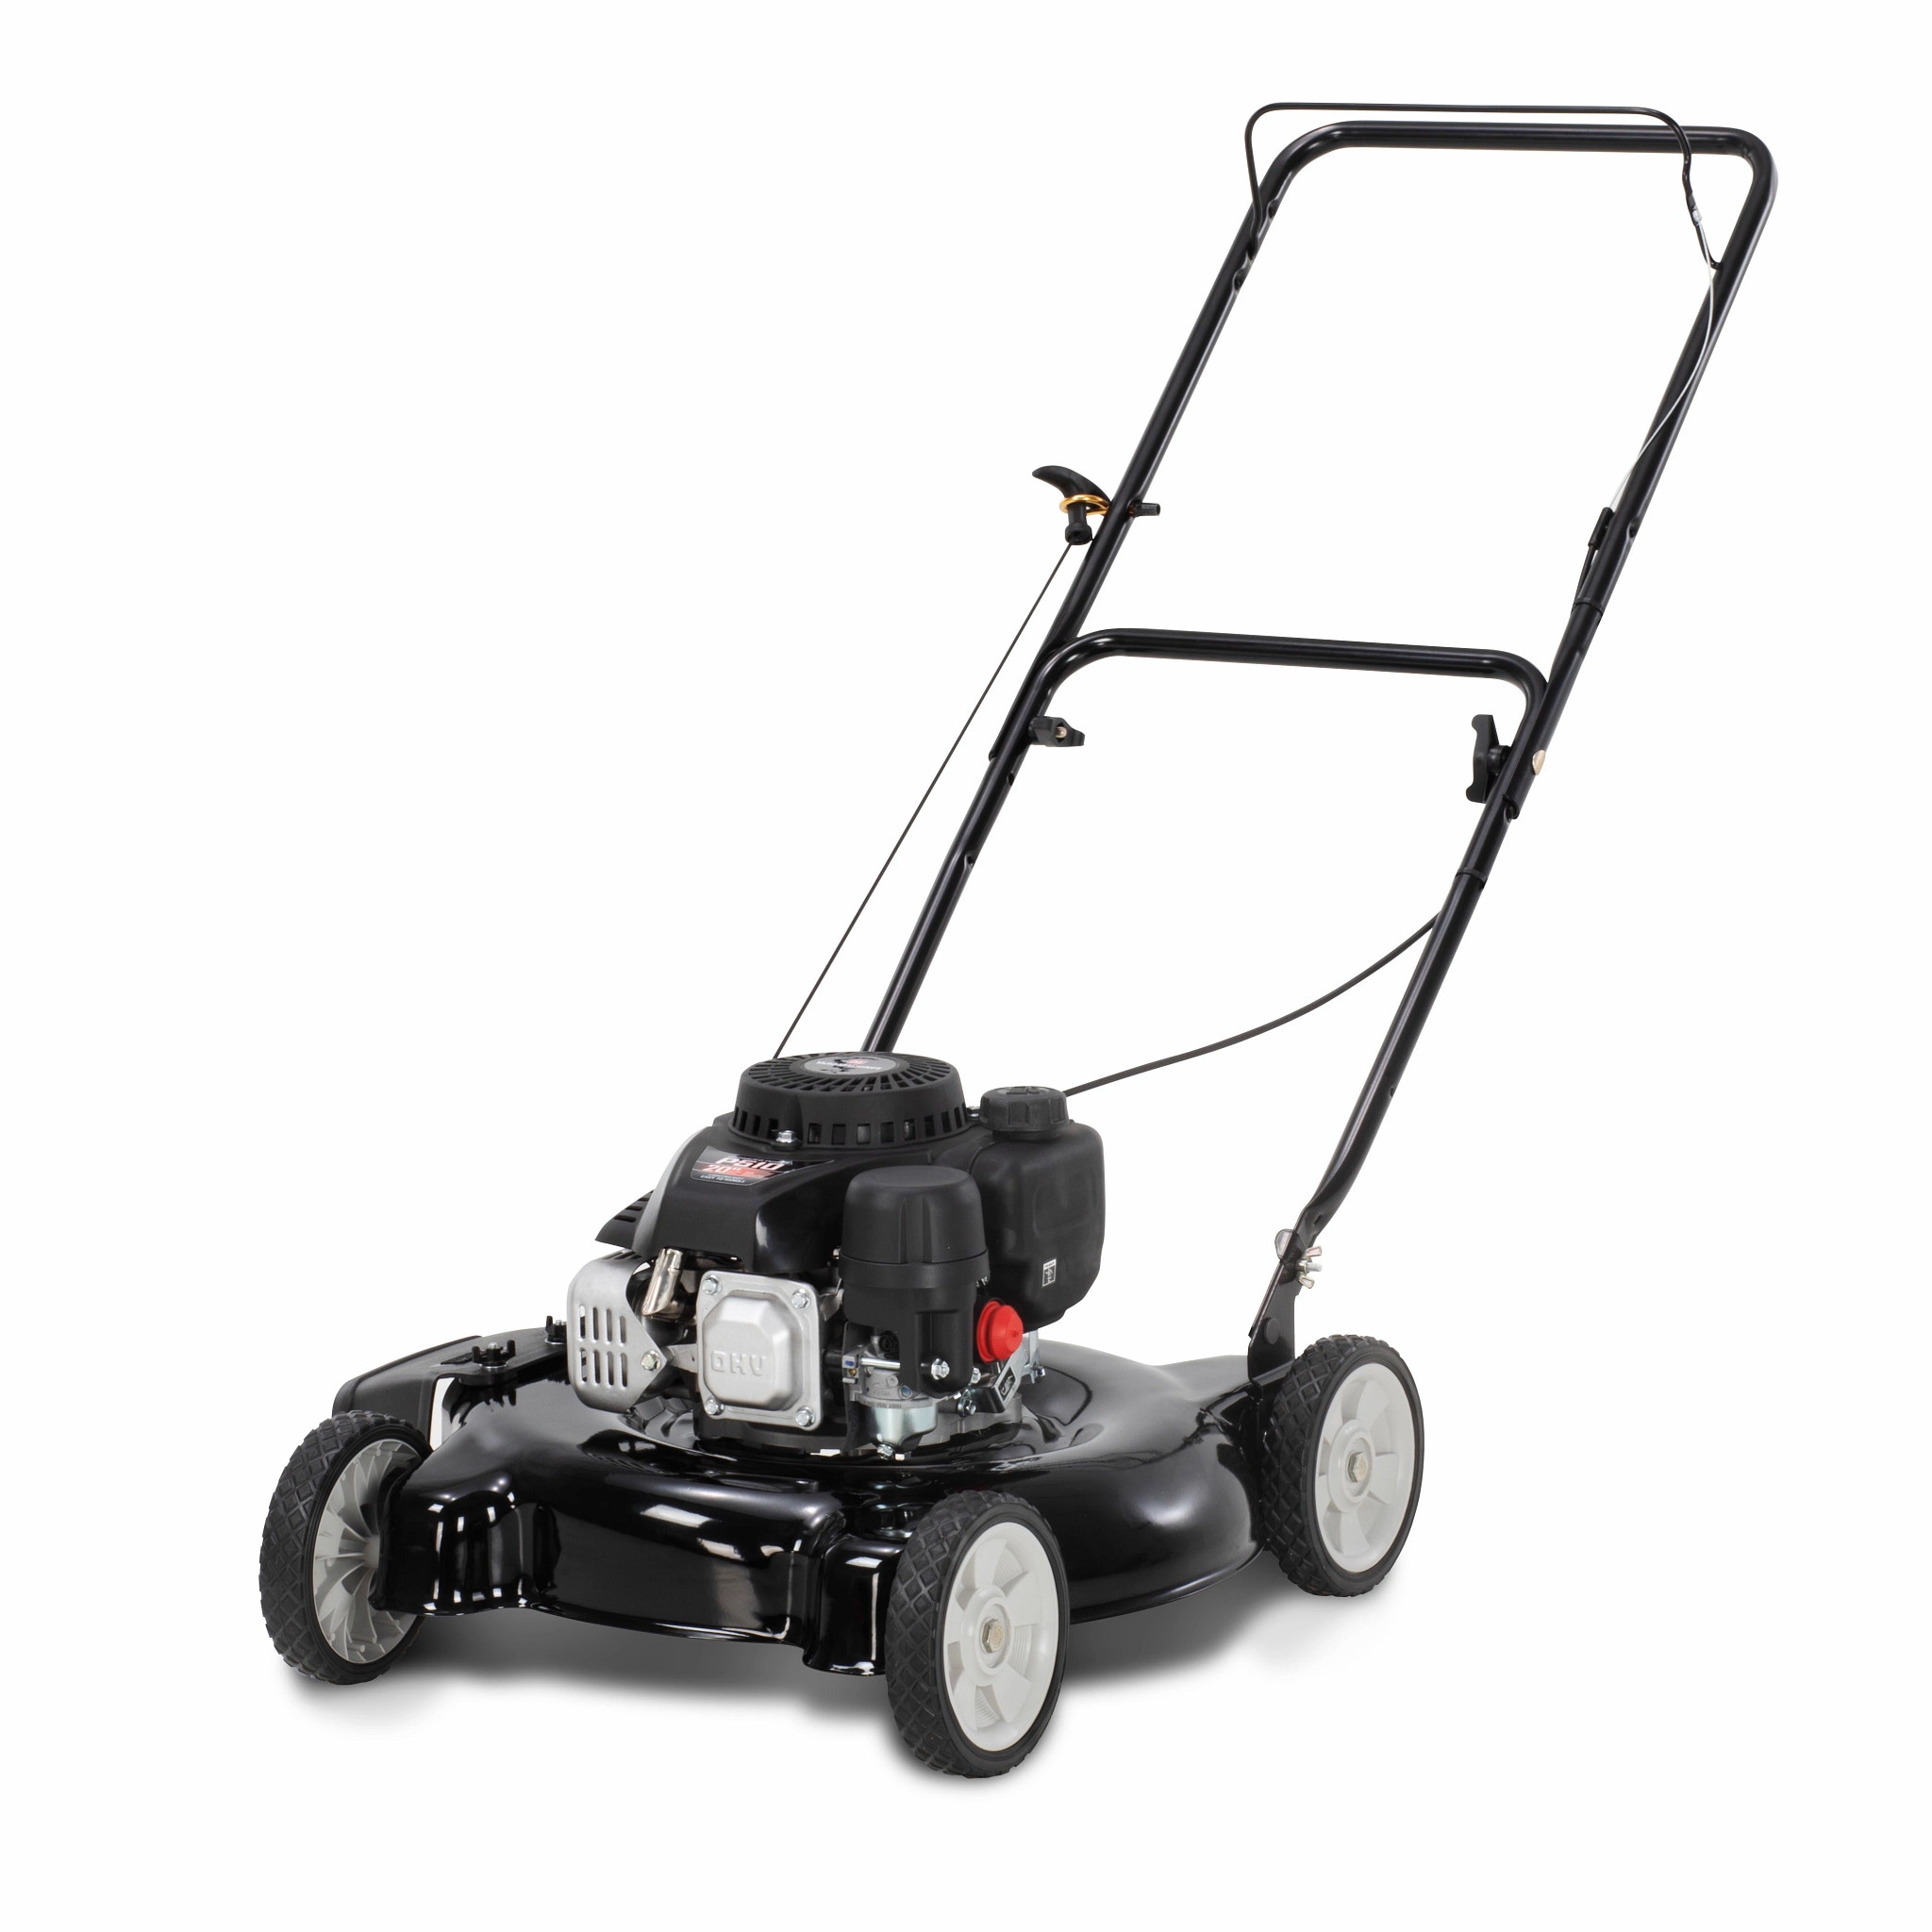 Top 10 Push Lawn Mowers of 2018 - Lawn Mower Recycle & Disposal Service